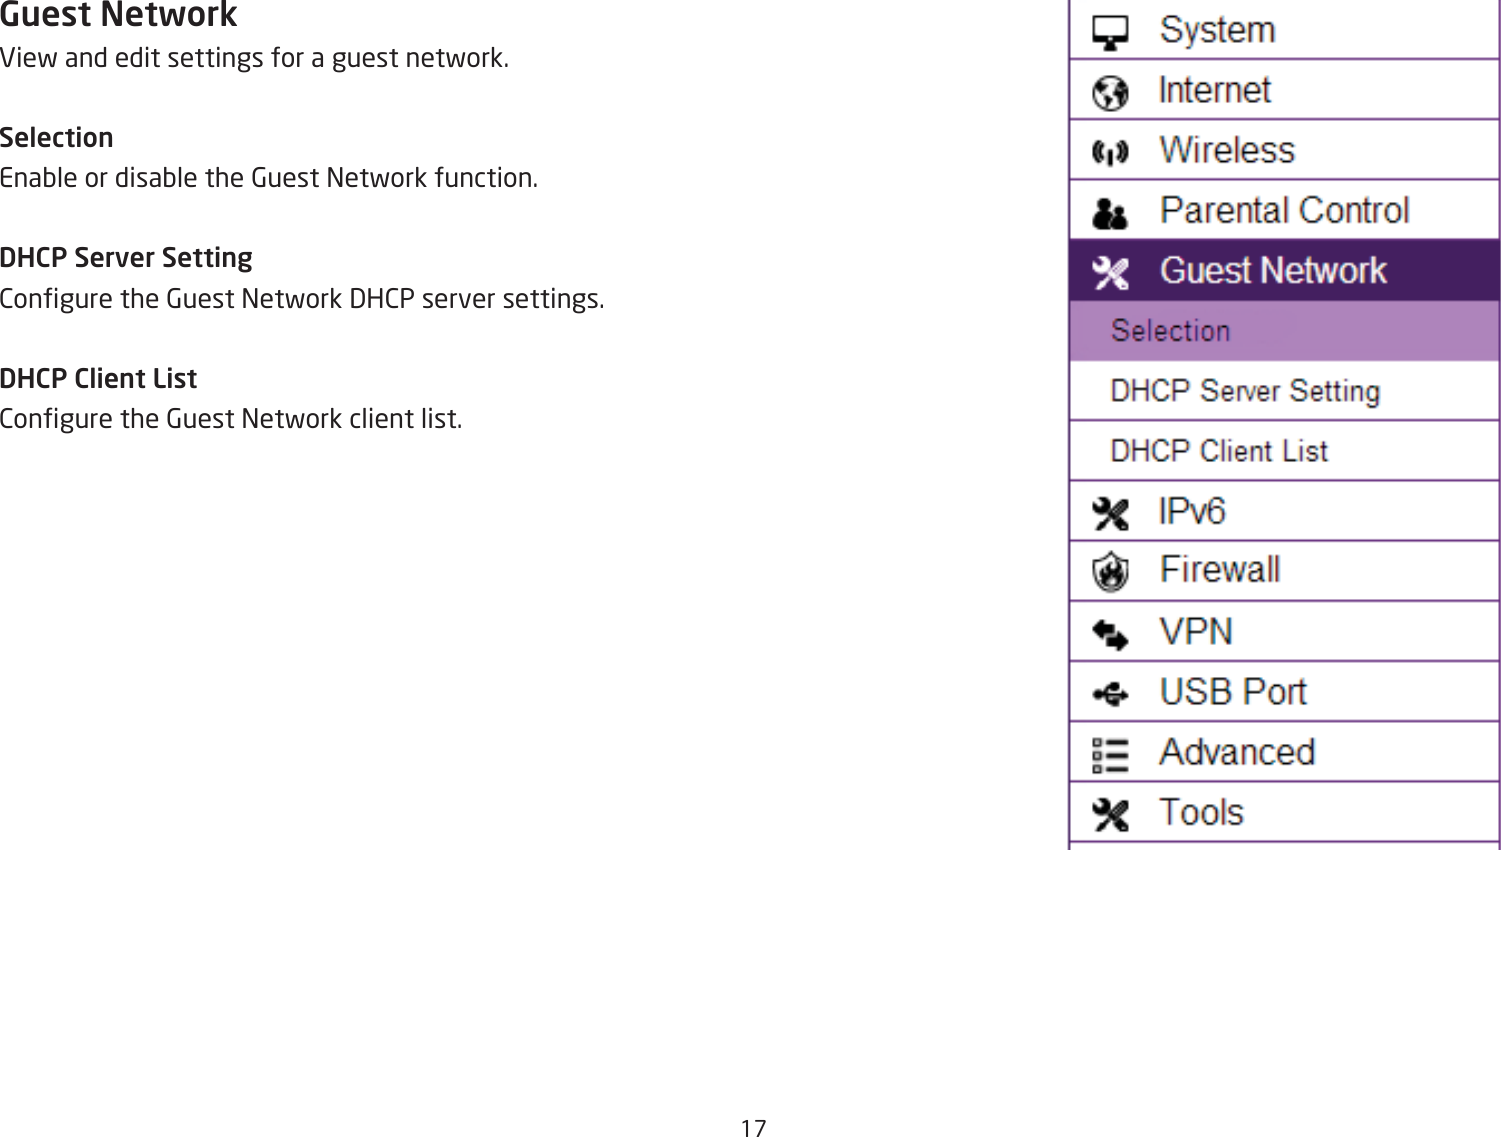 1&amp;Guest NetworkEief and edit settings for a guest netfork.SelectionEnaQle or disaQle the 6uest =etfork function.DHCP Server Setting2ongure the 6uest =etfork 3H2P server settings.DHCP Client List2ongure the 6uest =etfork client list.